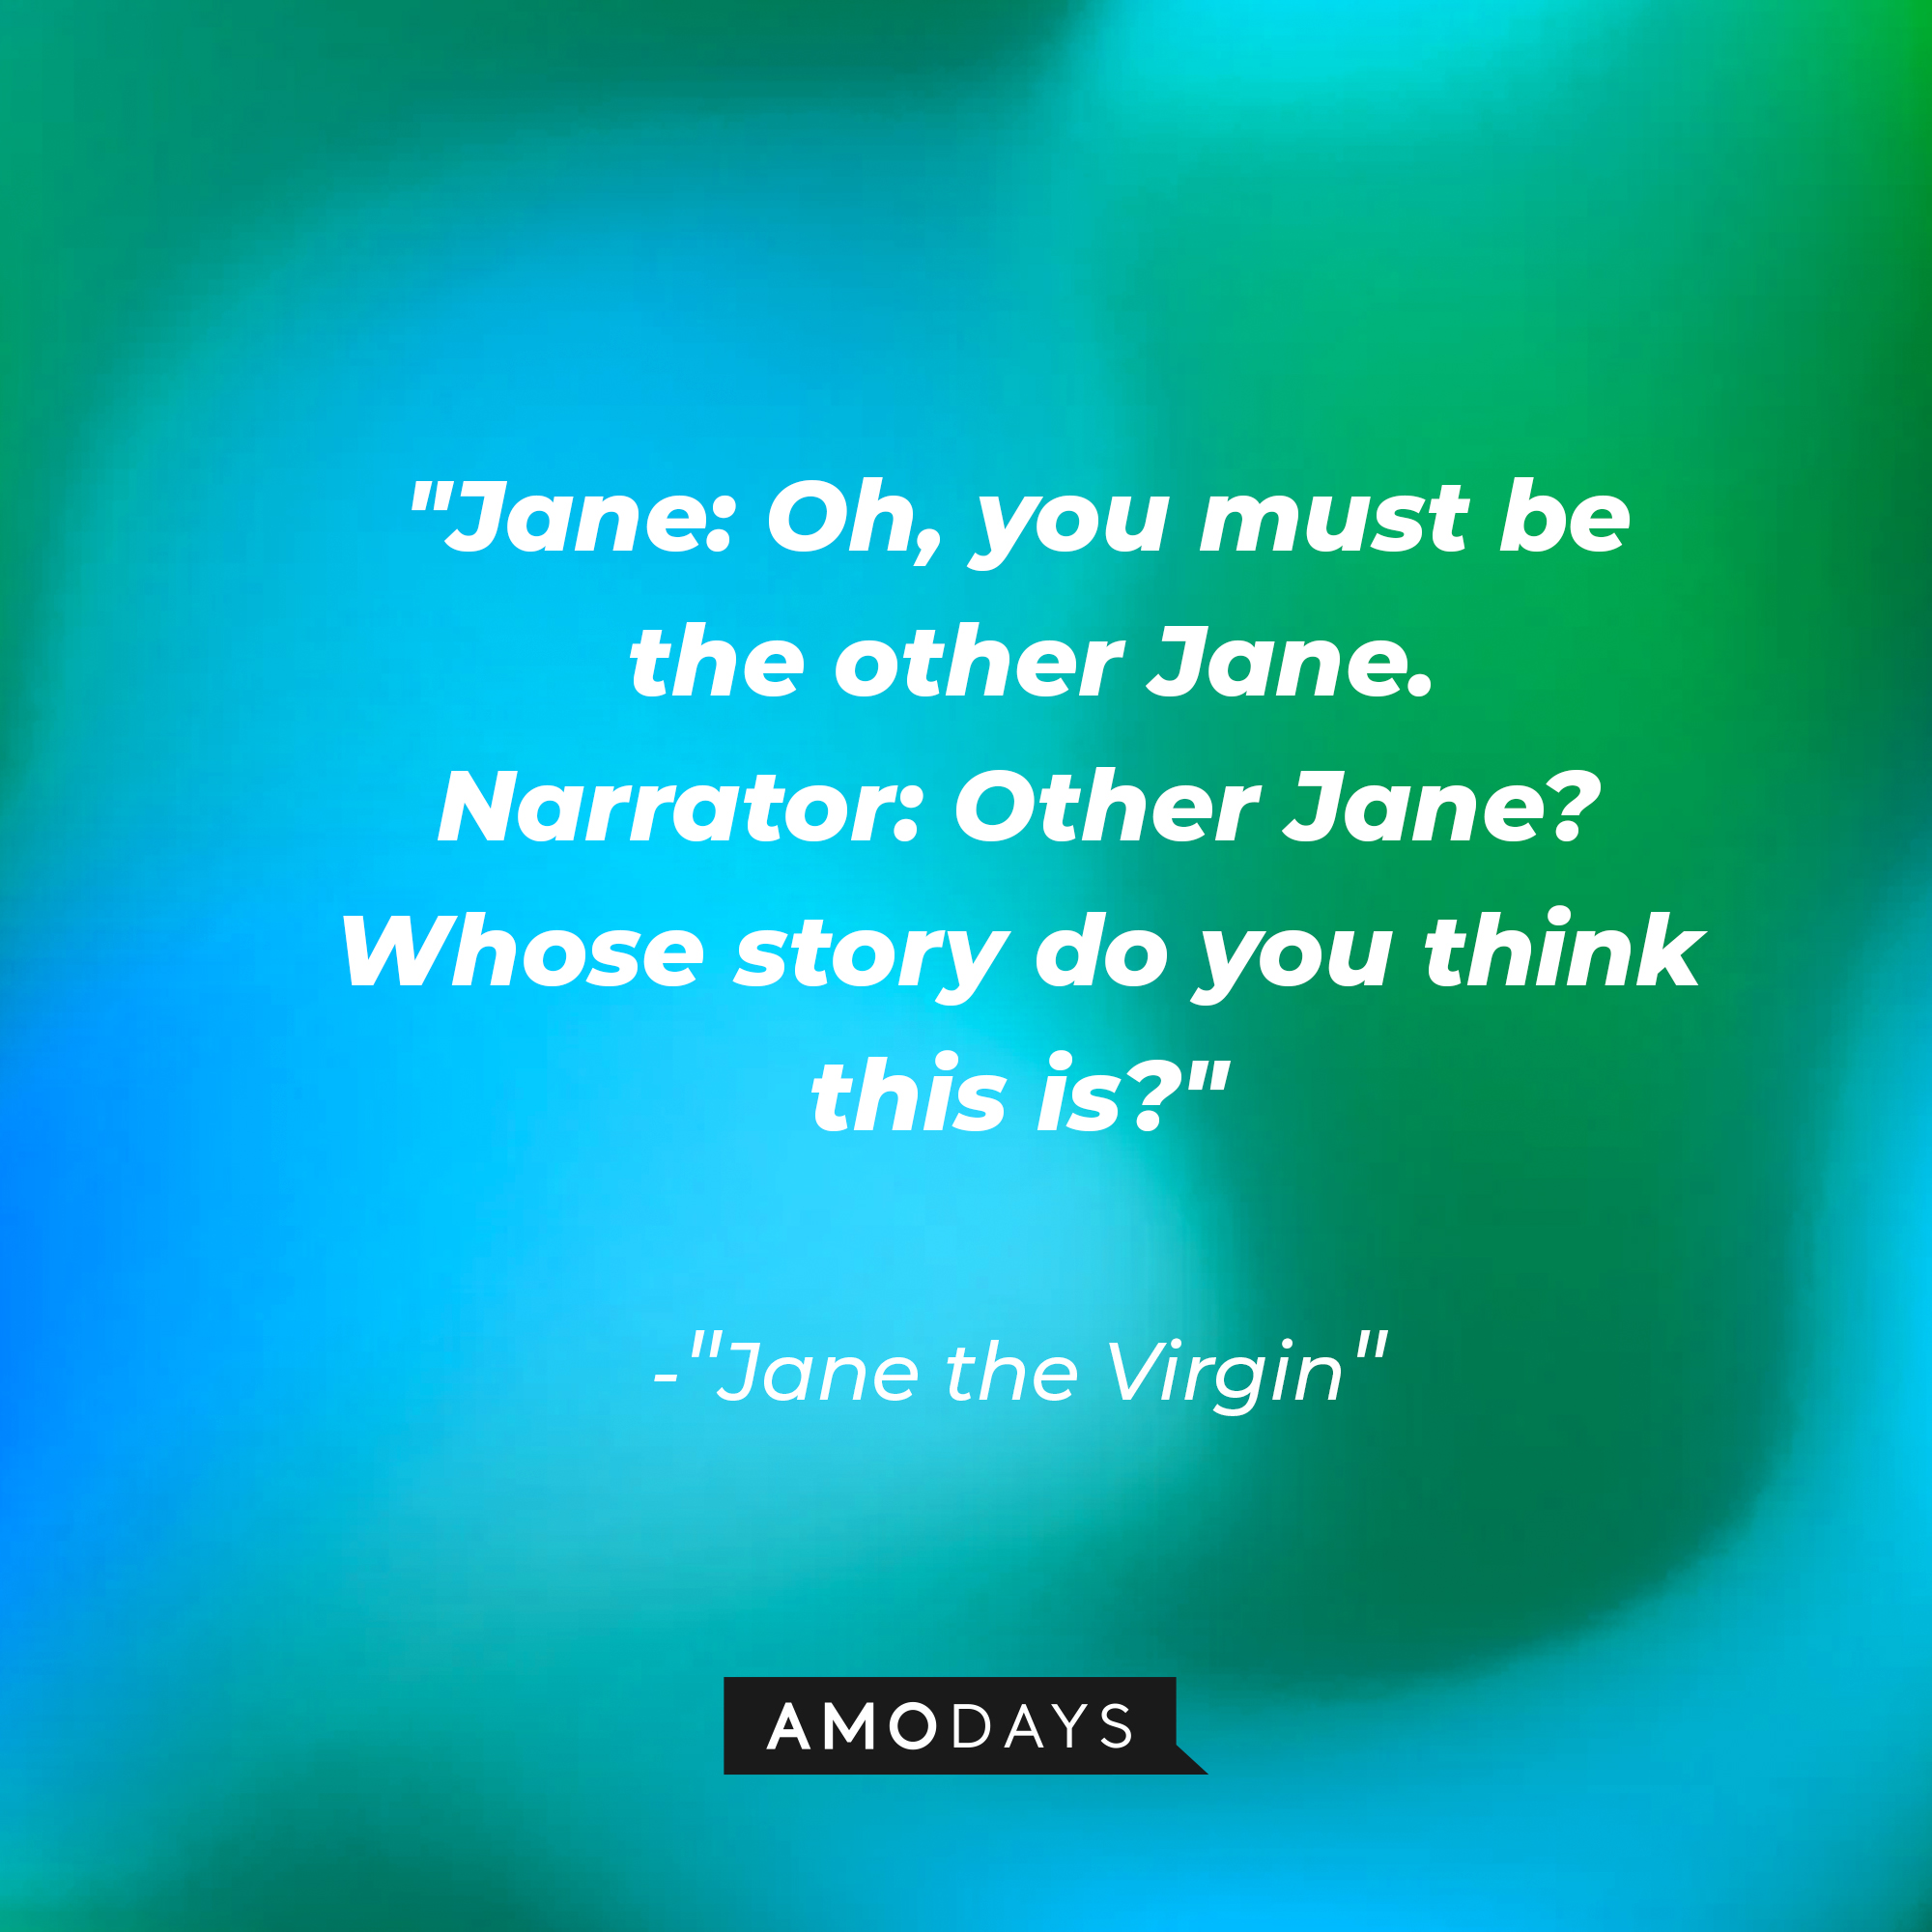 Jane Villanueva's dialogue in "Jane the Virgin:" "Jane: Oh, you must be the other Jane; Narrator: Other Jane? Whose story do you think this is?" | Source: Amodays